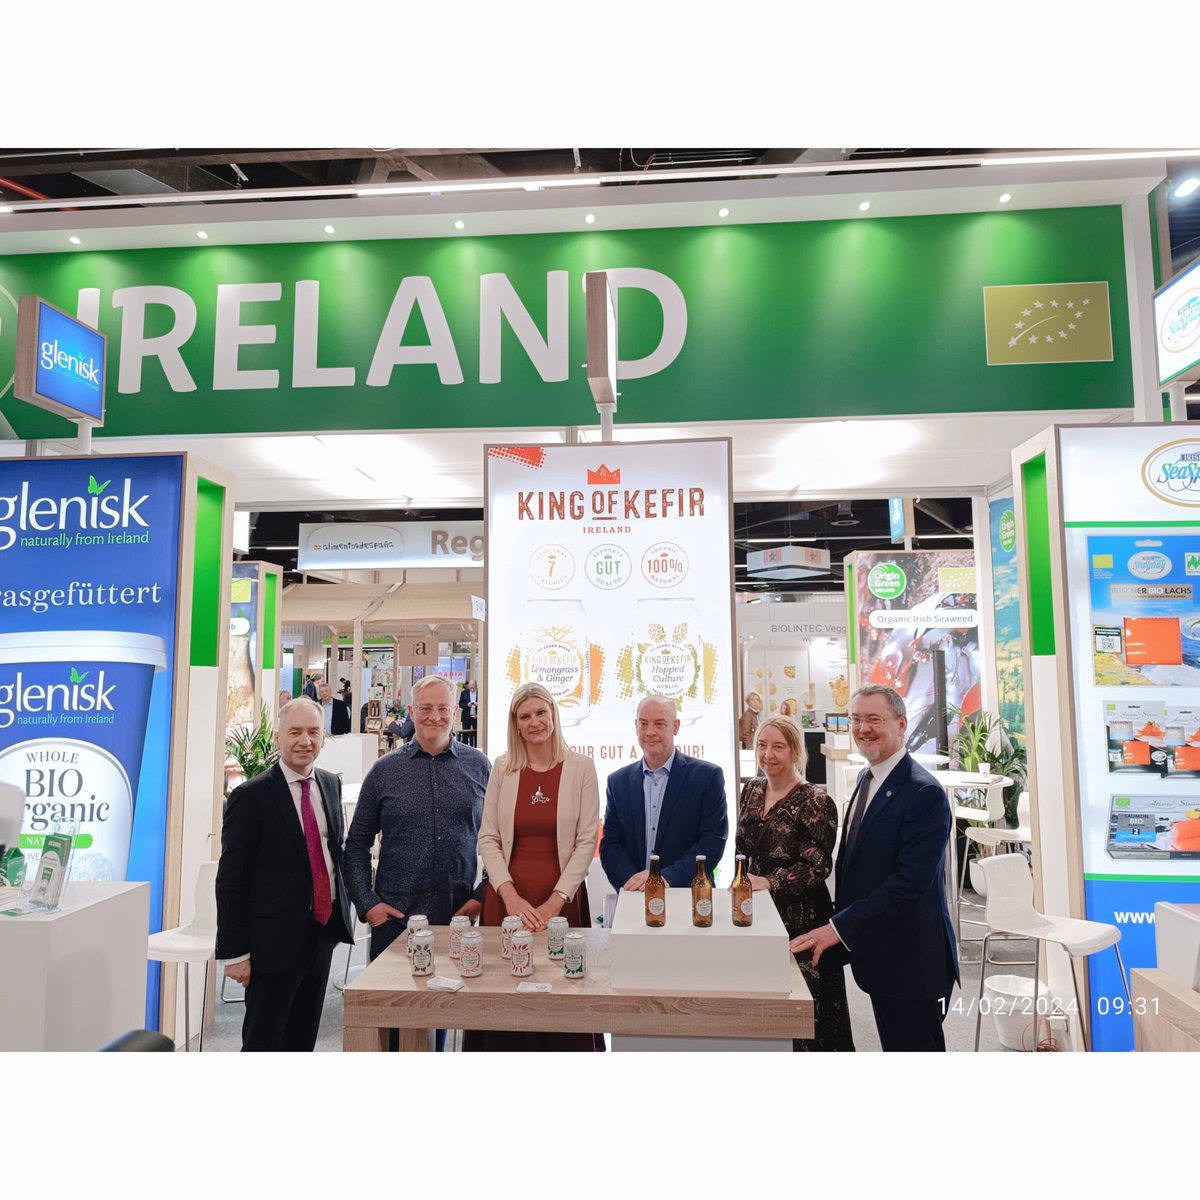 Today we had the pleasure of hosting Pippa Hackett and Jim O'Toole from Bord Bia at Biofach Vivaness. 
We are grateful for their team's support, without which we wouldn't be here. Thank you for visiting us! #BiofachVivaness #BordBia #grateful